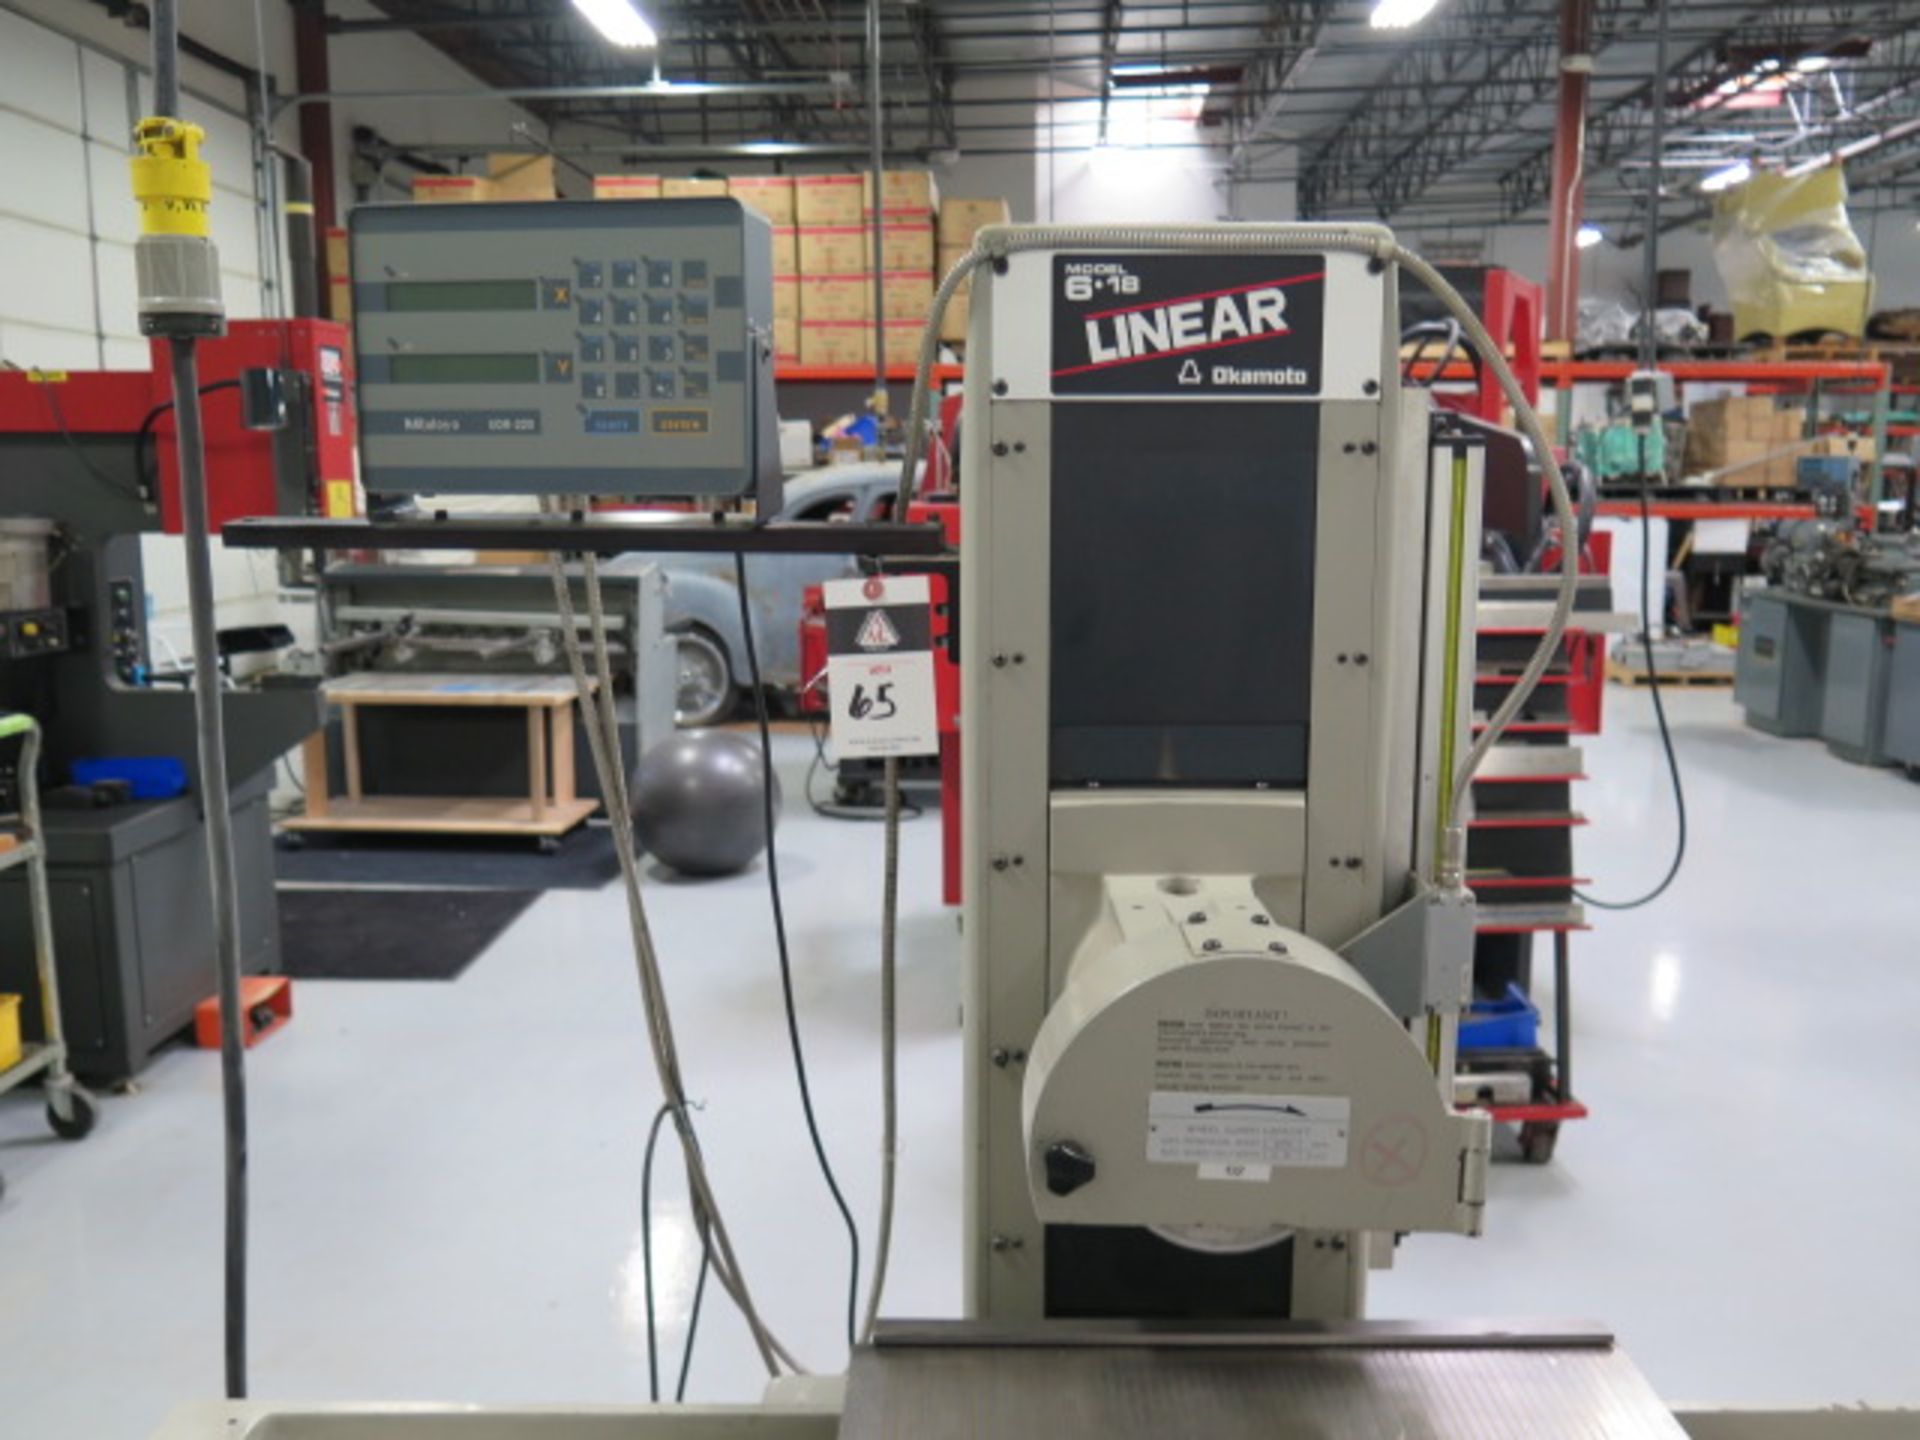 Okamoto “6-18 LINEAR” 6” x 18” Surface Grinder s/n 4469 w/ Mitutoyo UDR-220 Program DRO, SOLD AS IS - Image 4 of 15